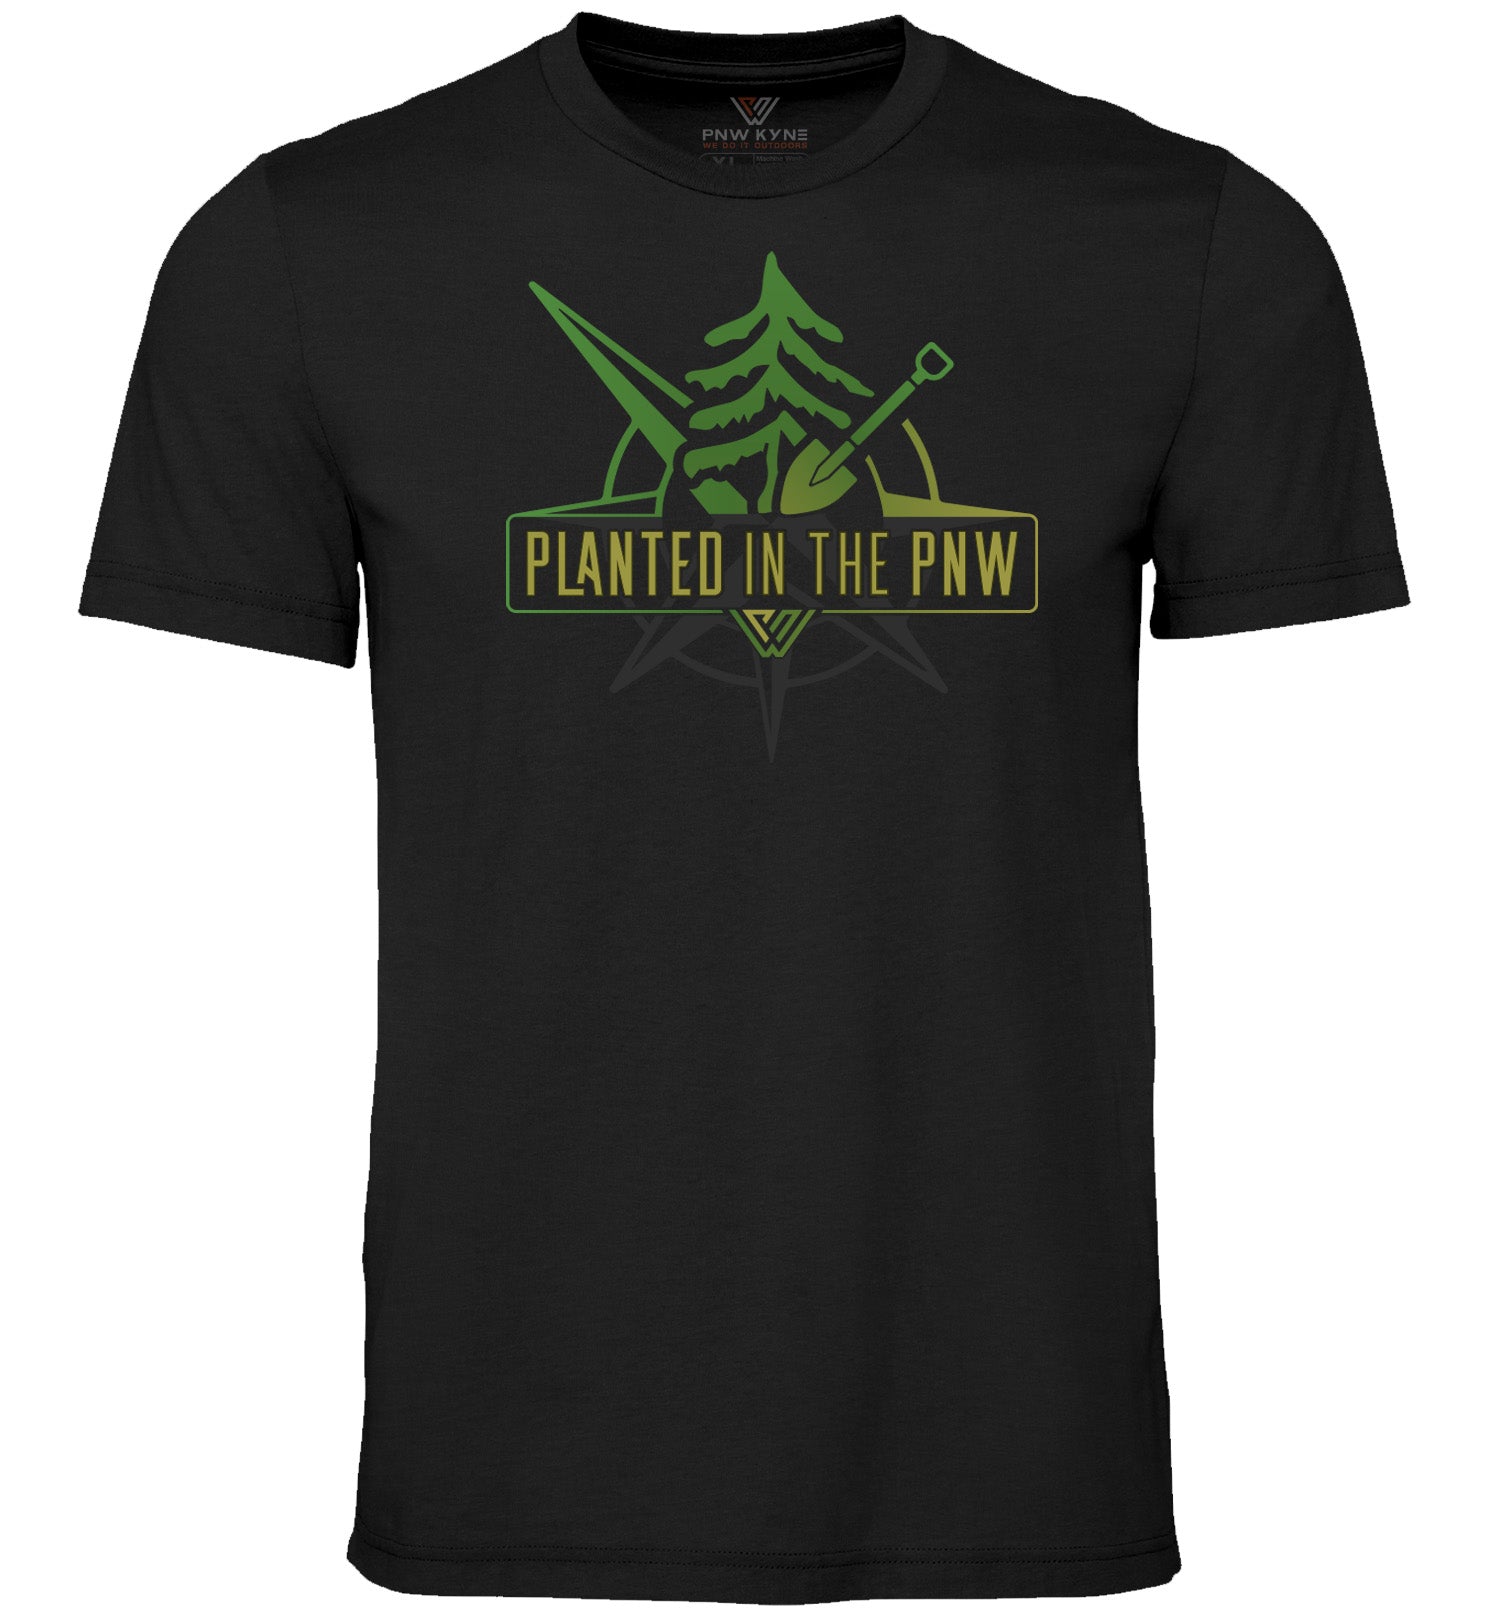 PNW Shirt - Planted in the PNW - Short Sleeve - Front - Dark Grey Heather